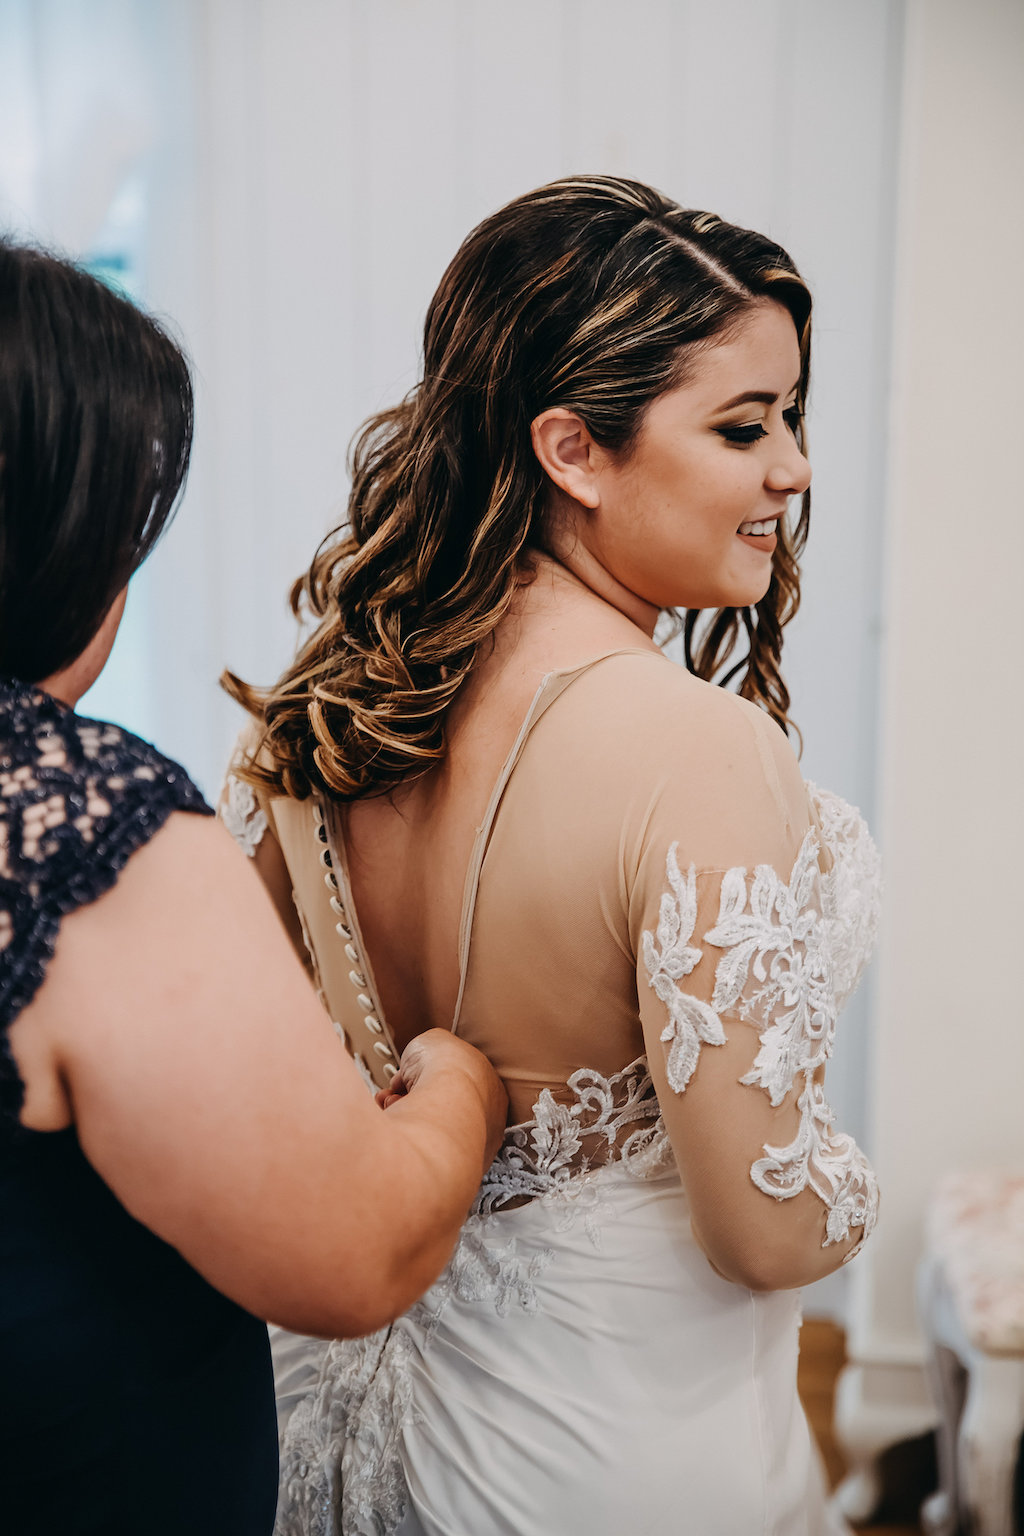 Lace Sleeve David's Bridal White and Nude Wedding Dress and Mother of the Bride | Tampa Bay Wedding Photographer Rad Red Creative